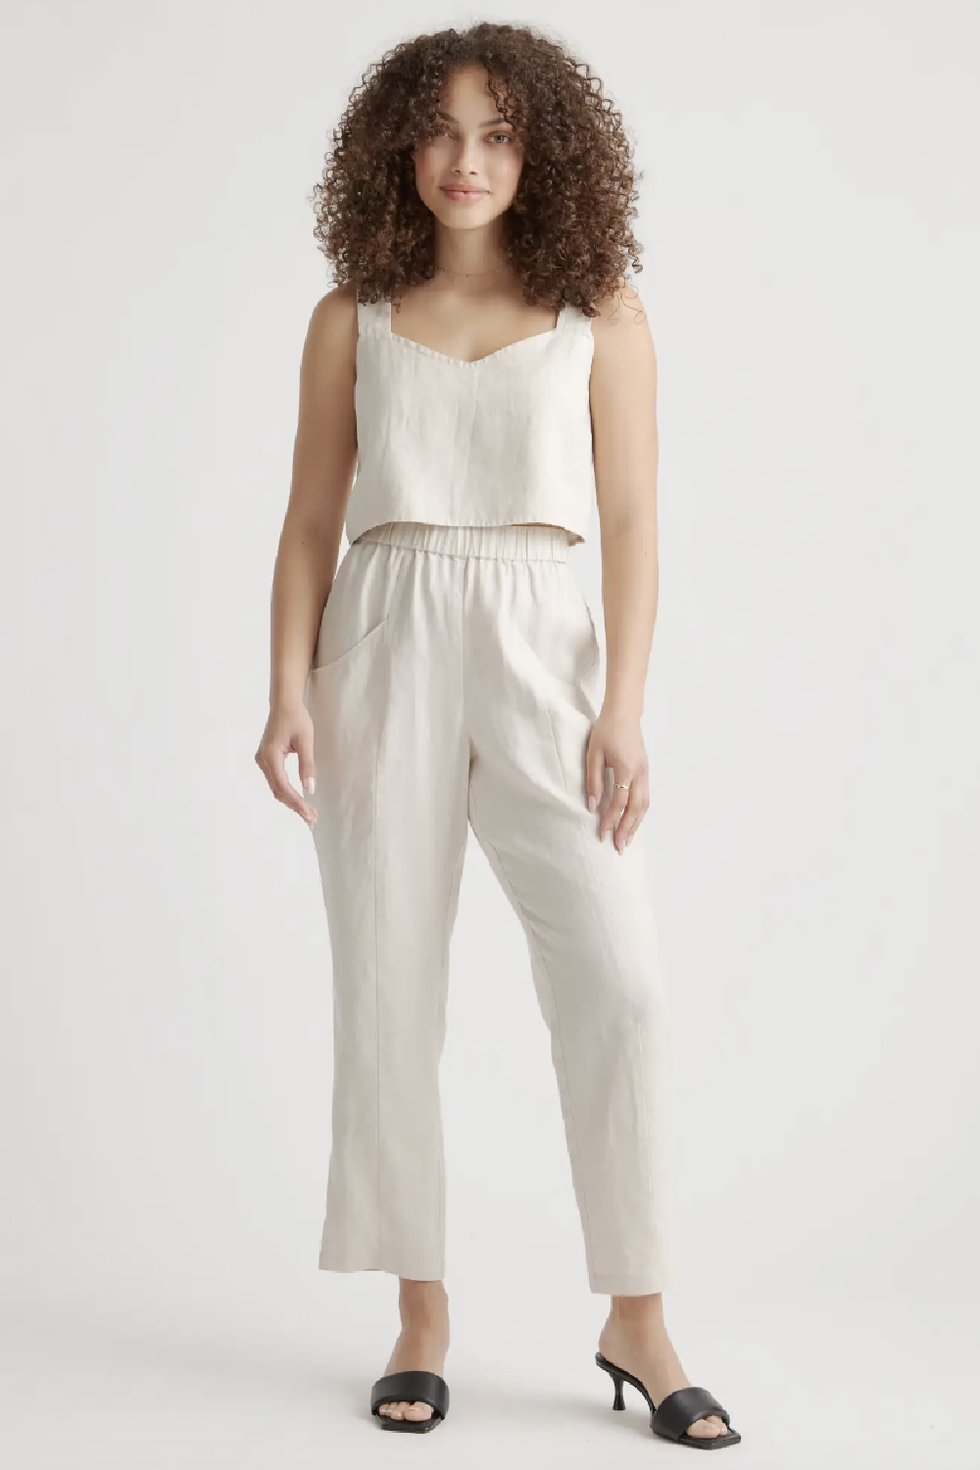 100% European Linen Tapered Ankle Pant